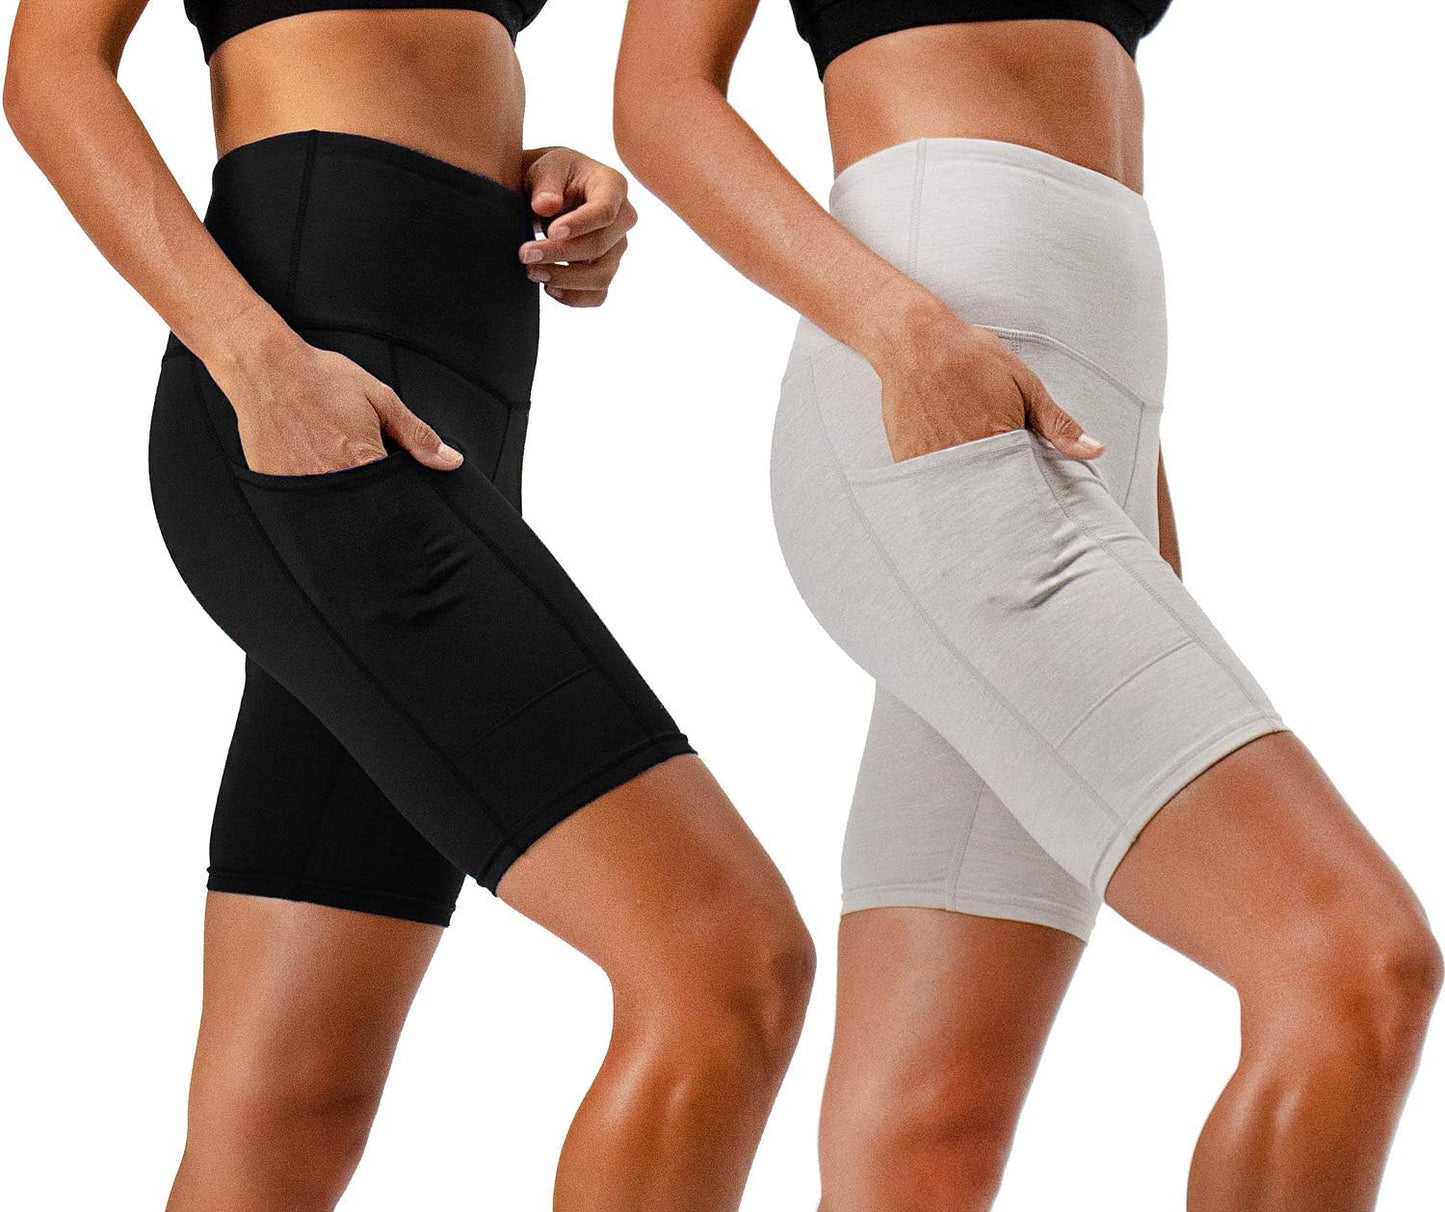 Women's 2-Pack High Waist Shorts with Side Pockets